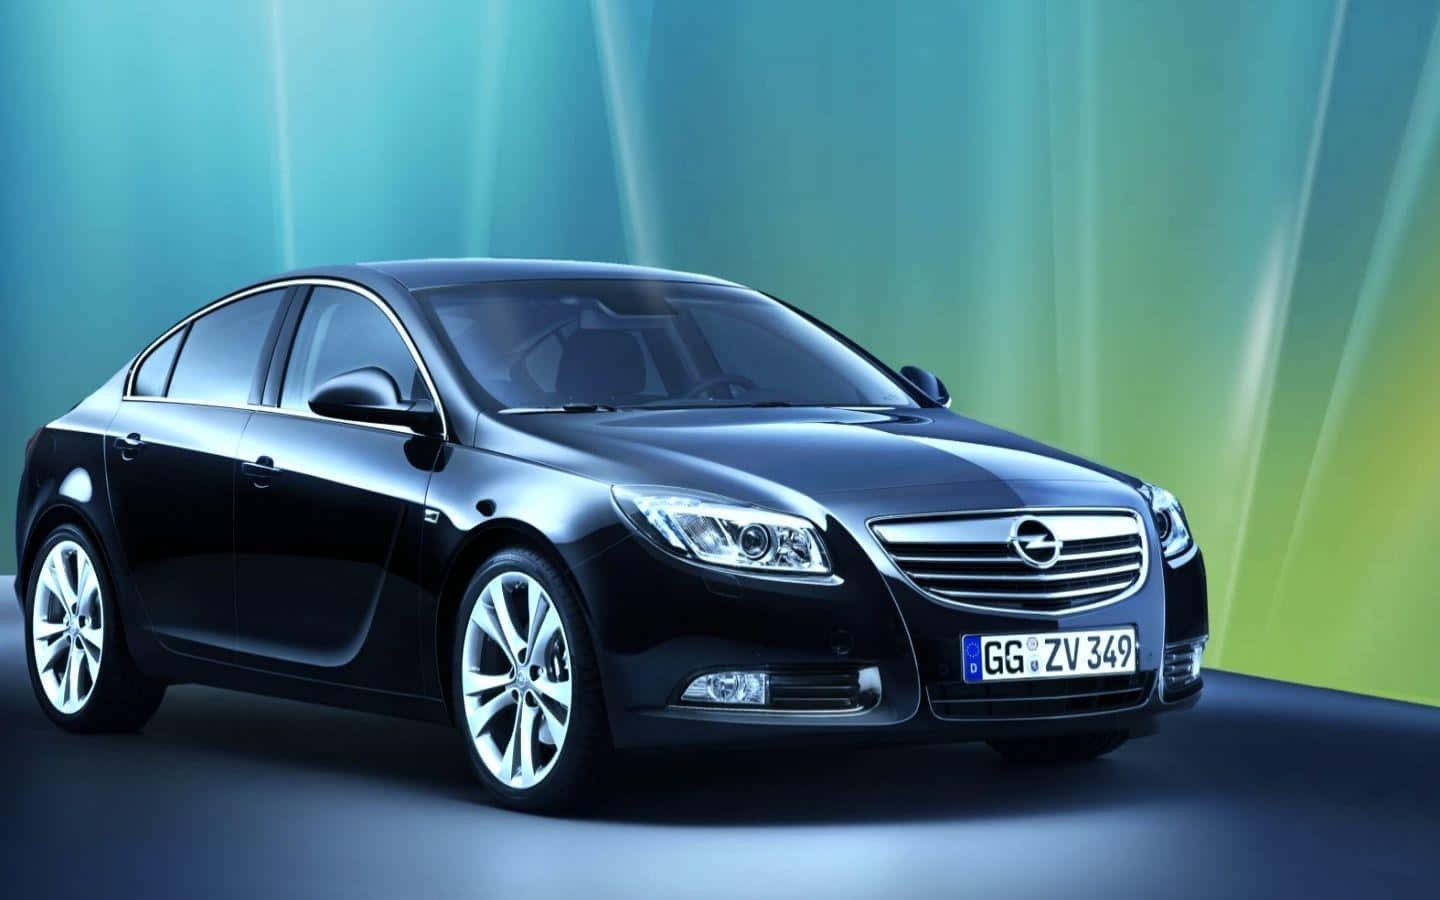 Opel Insignia in Action Wallpaper